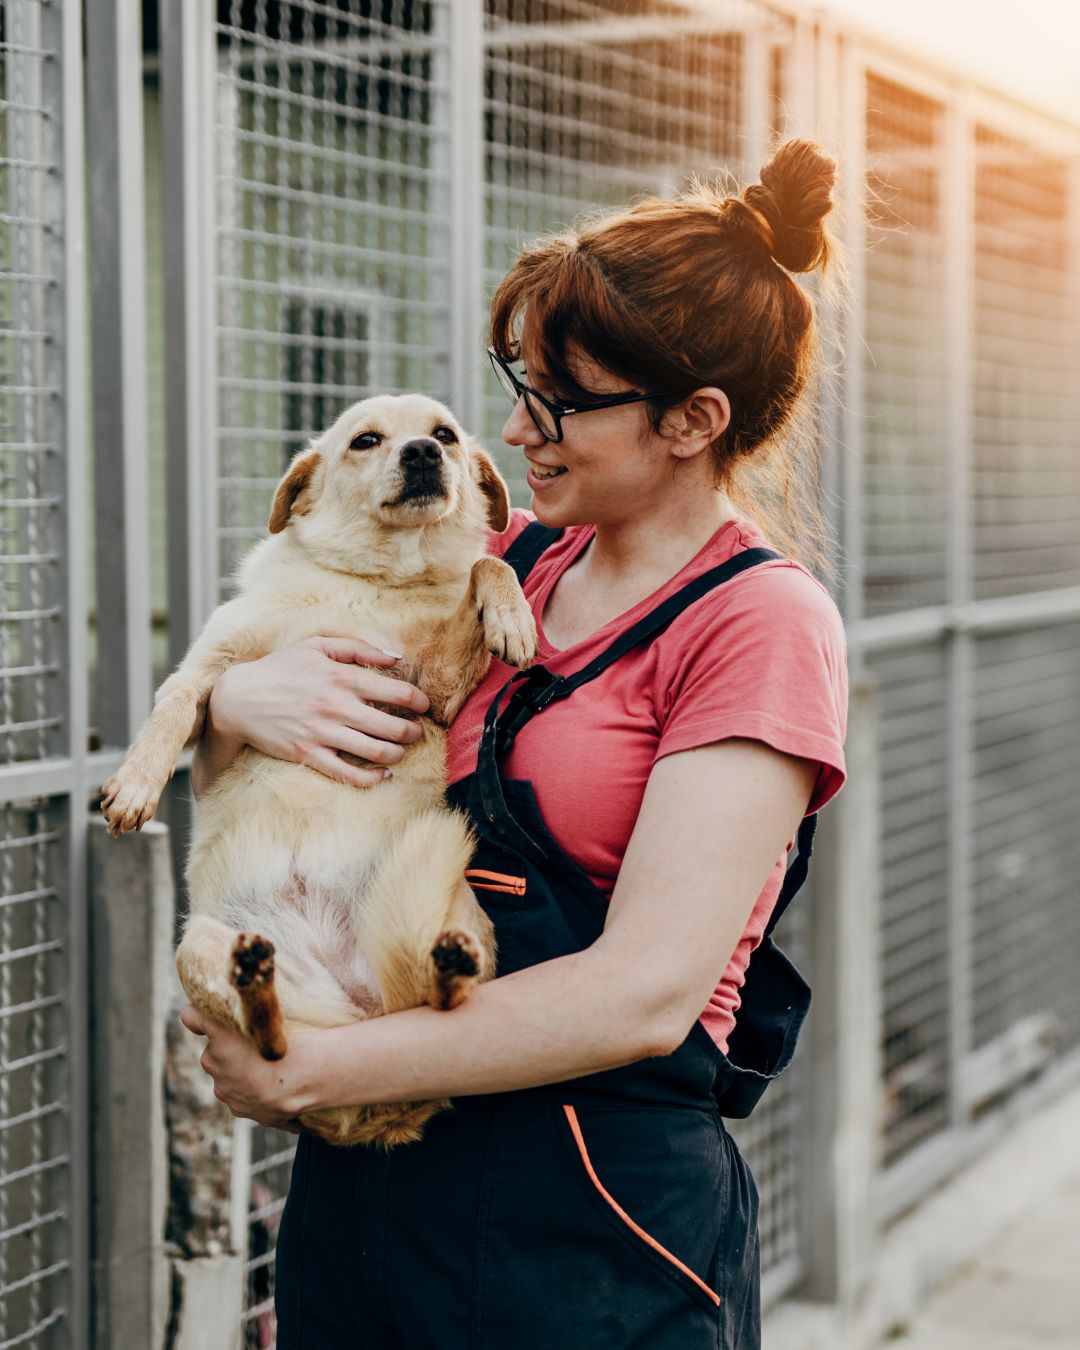 Making a positive impact on the community by choosing adoption over buying from breeders